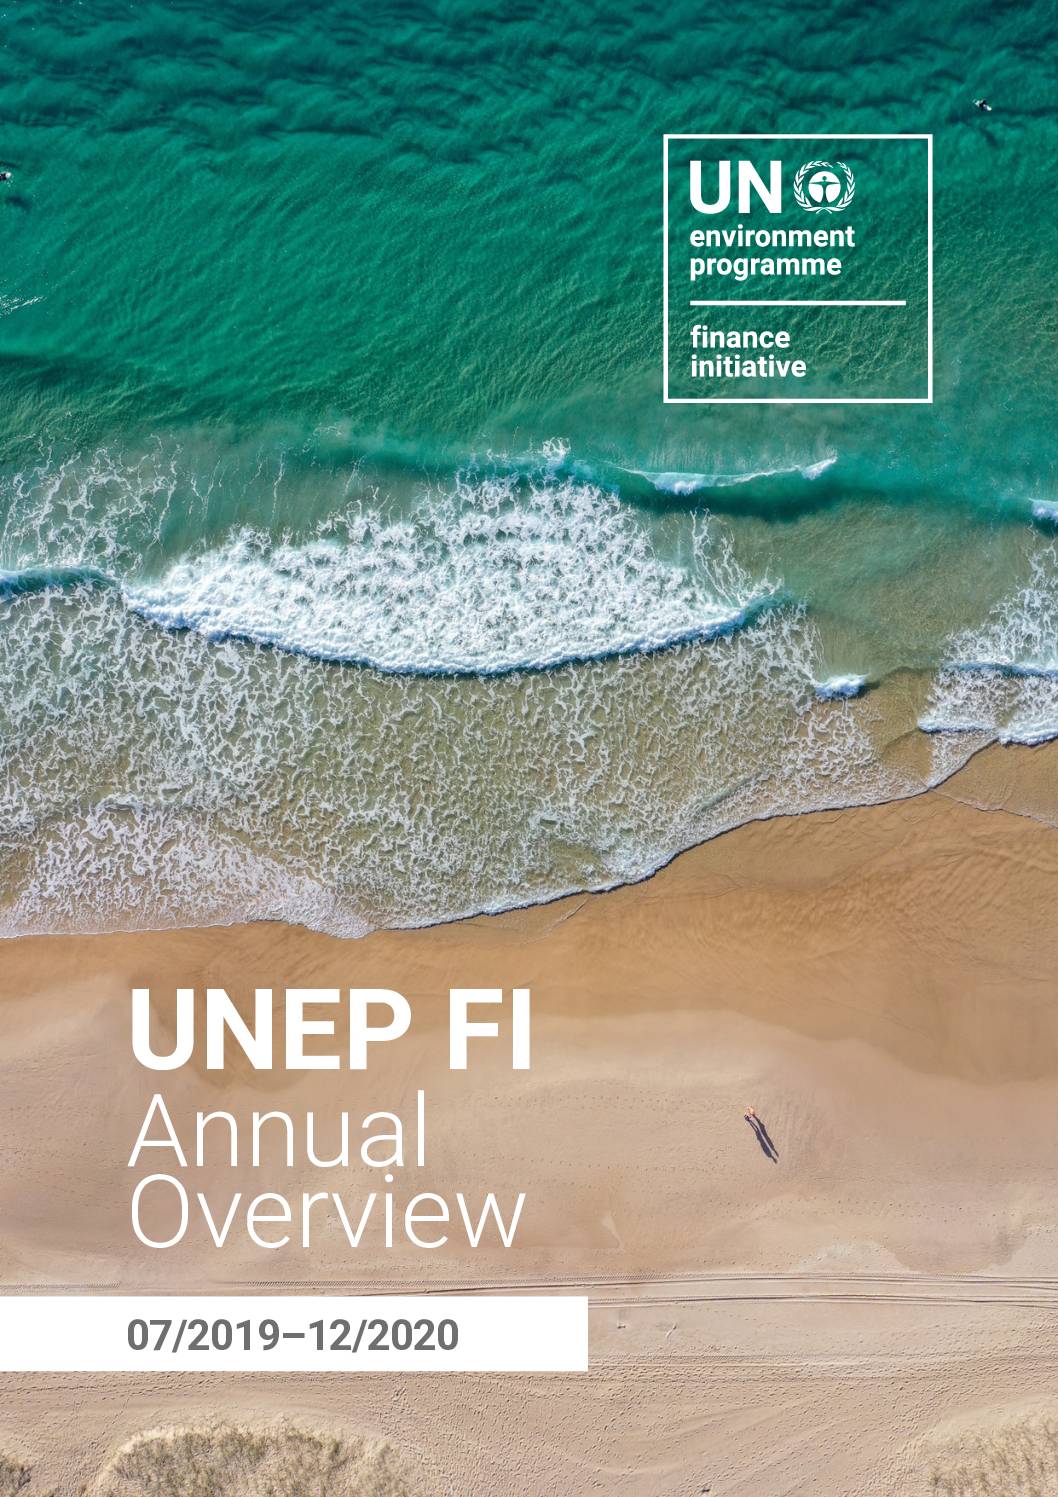 Sustainable Finance in Action: UNEP FI’s Latest Review